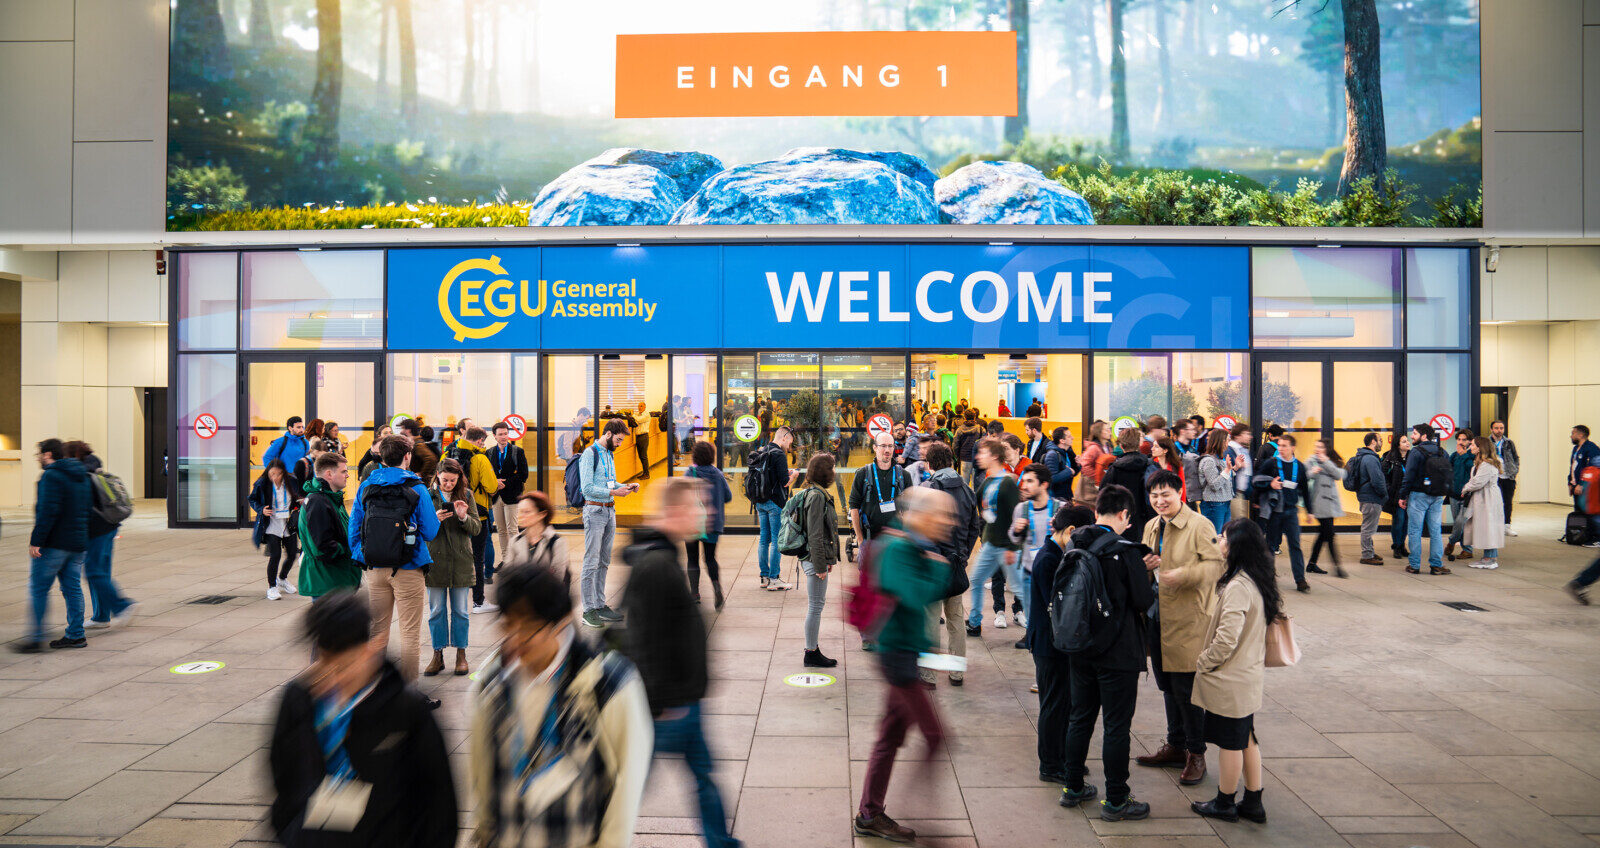 conference participants standing outside of building entrance, with blue sign EGU: Welcome